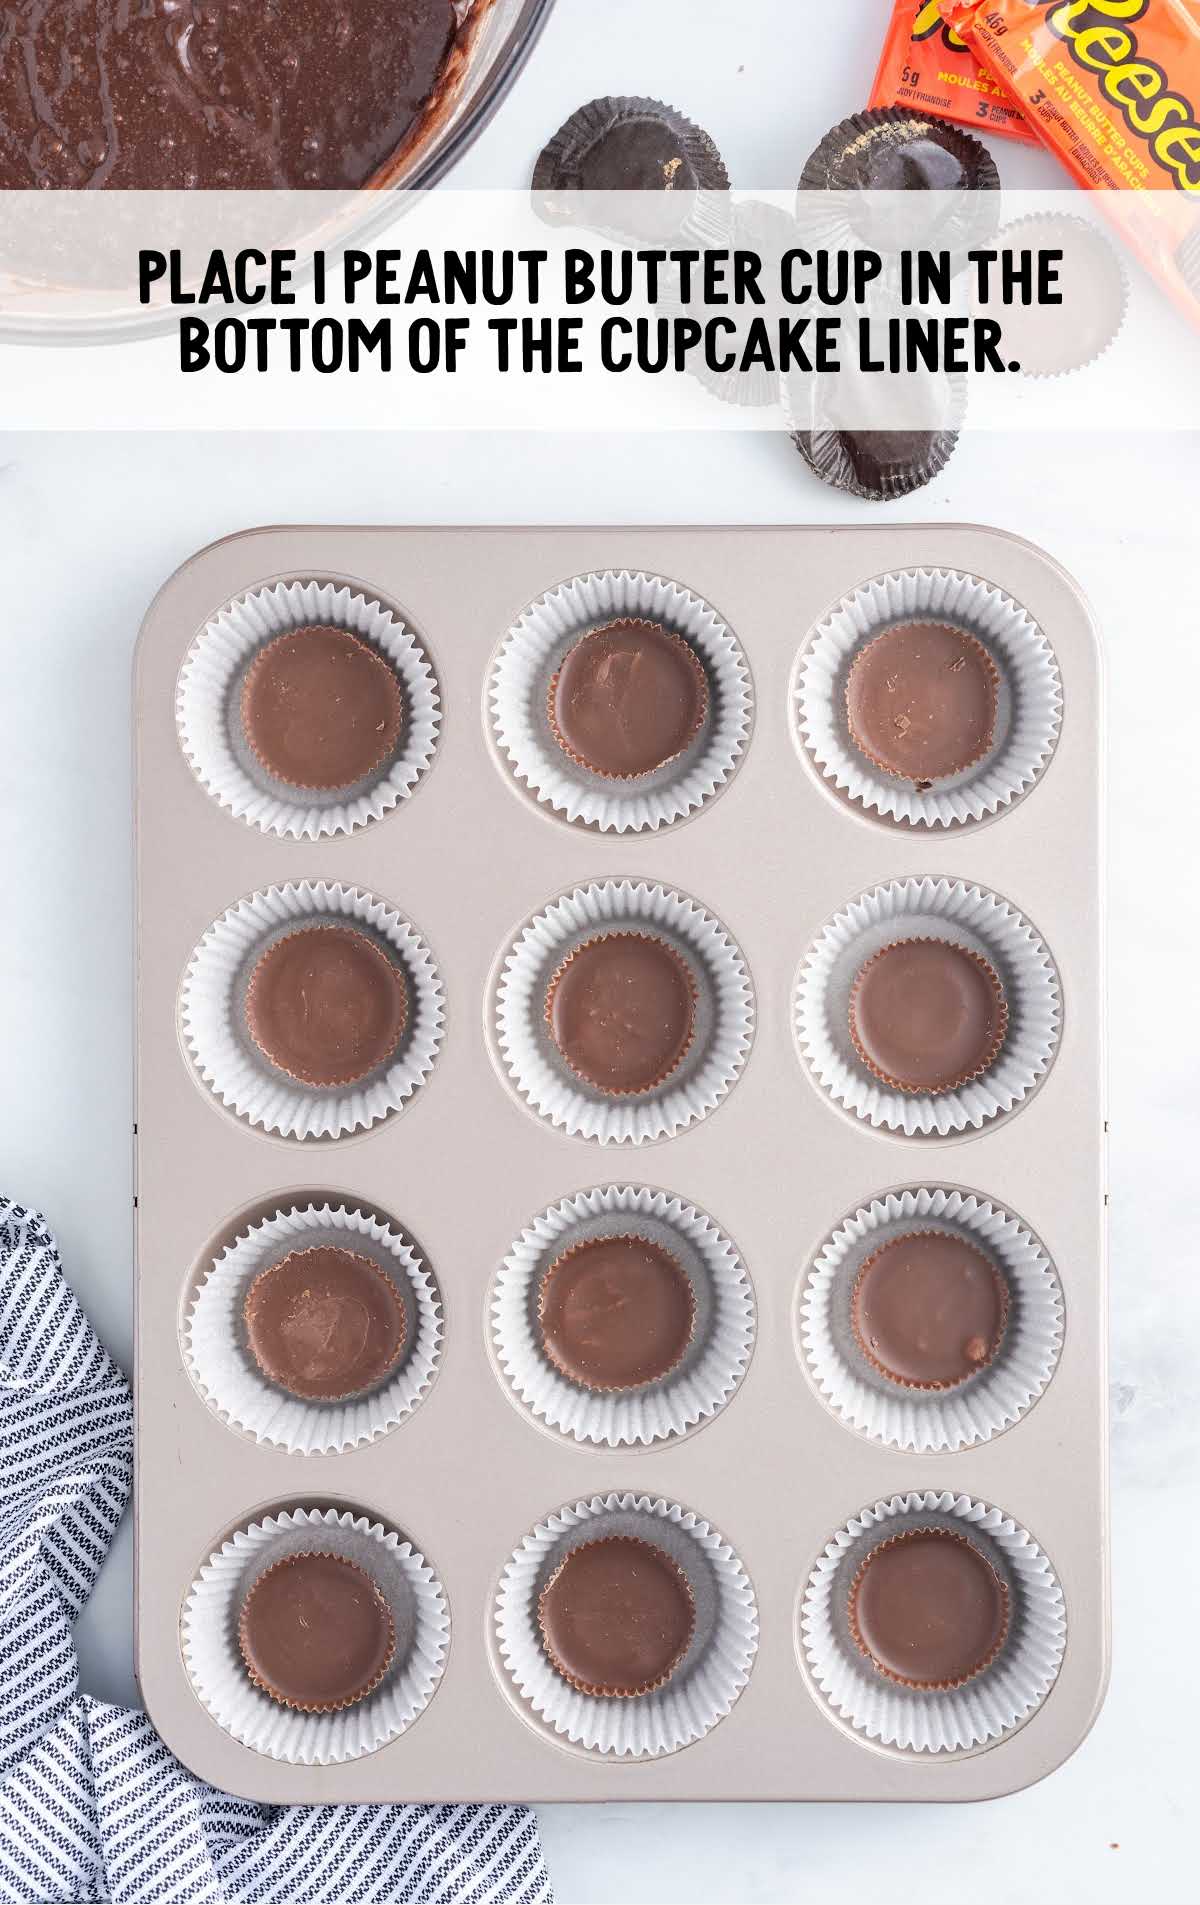 peanut butter cup placed in the bottom of the cupcake liner in a cupcake pan